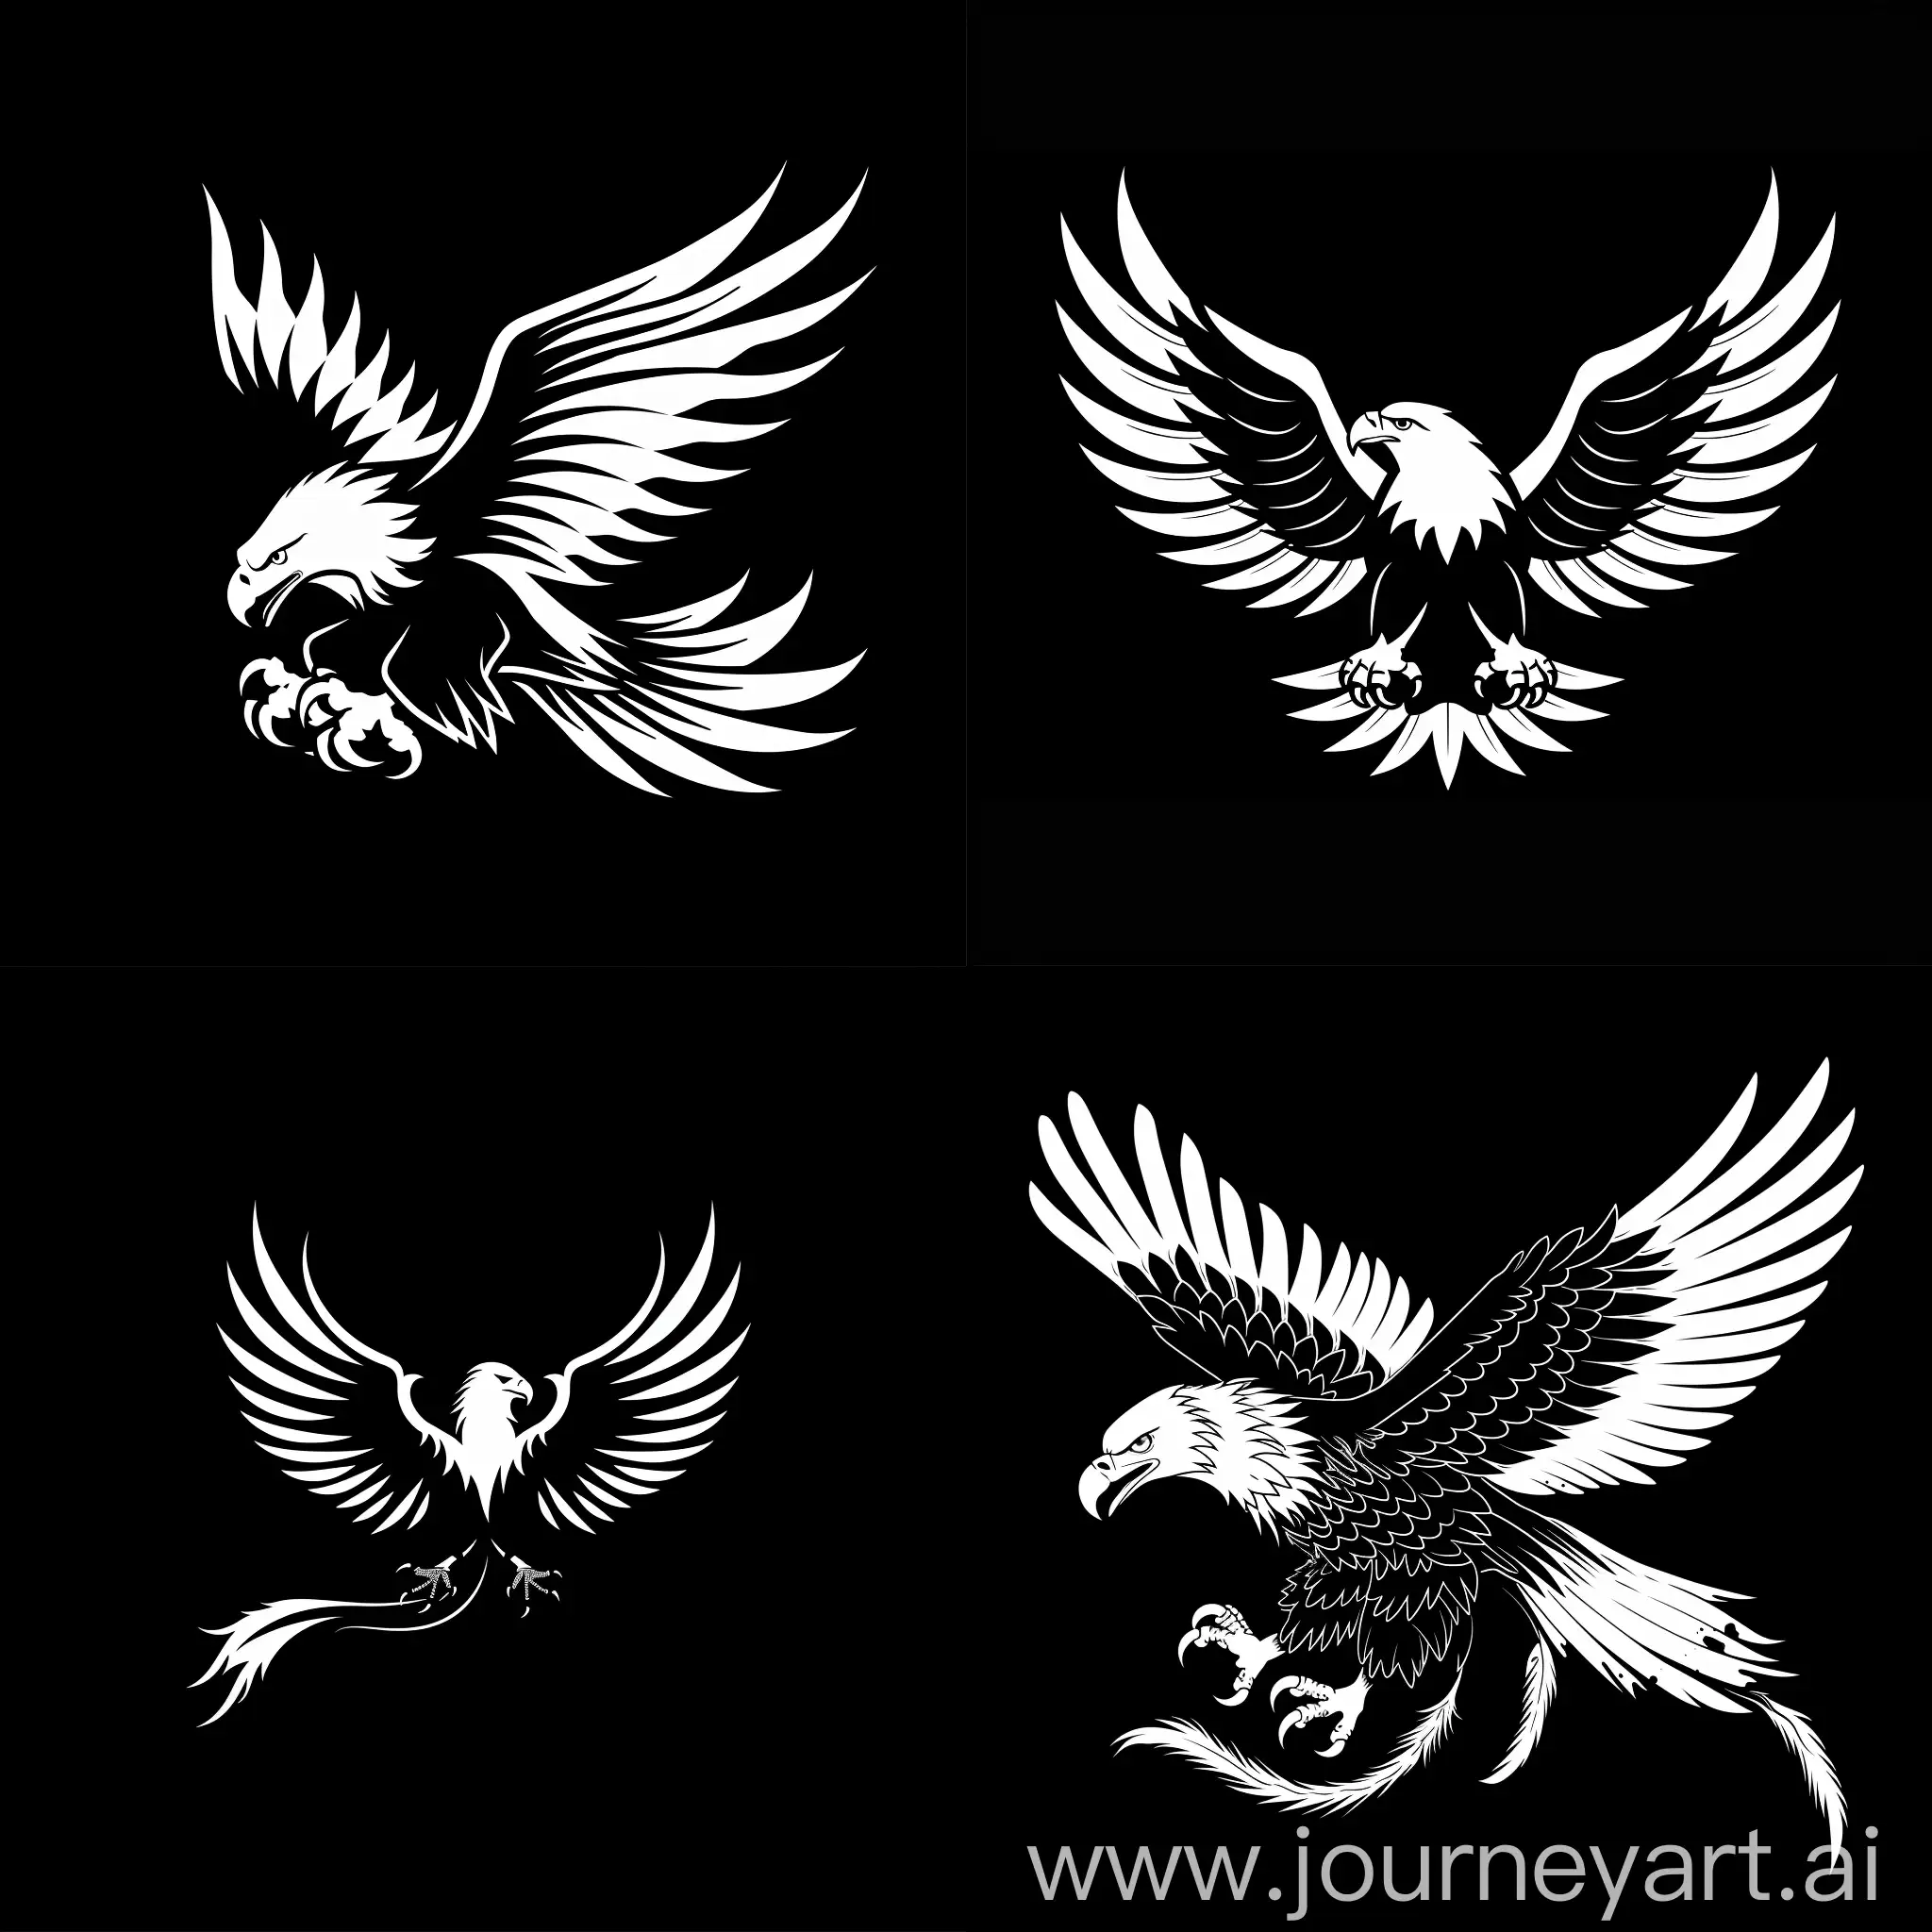 a black and white eagle logo with a long tail, eagle logo, with an eagle emblem, eagle wings, eagle, white eagle icon, eagle head, eagle beak, eagle feather, an eagle, majestic symmetrical eagle wings, an eagle flying, professional logo design